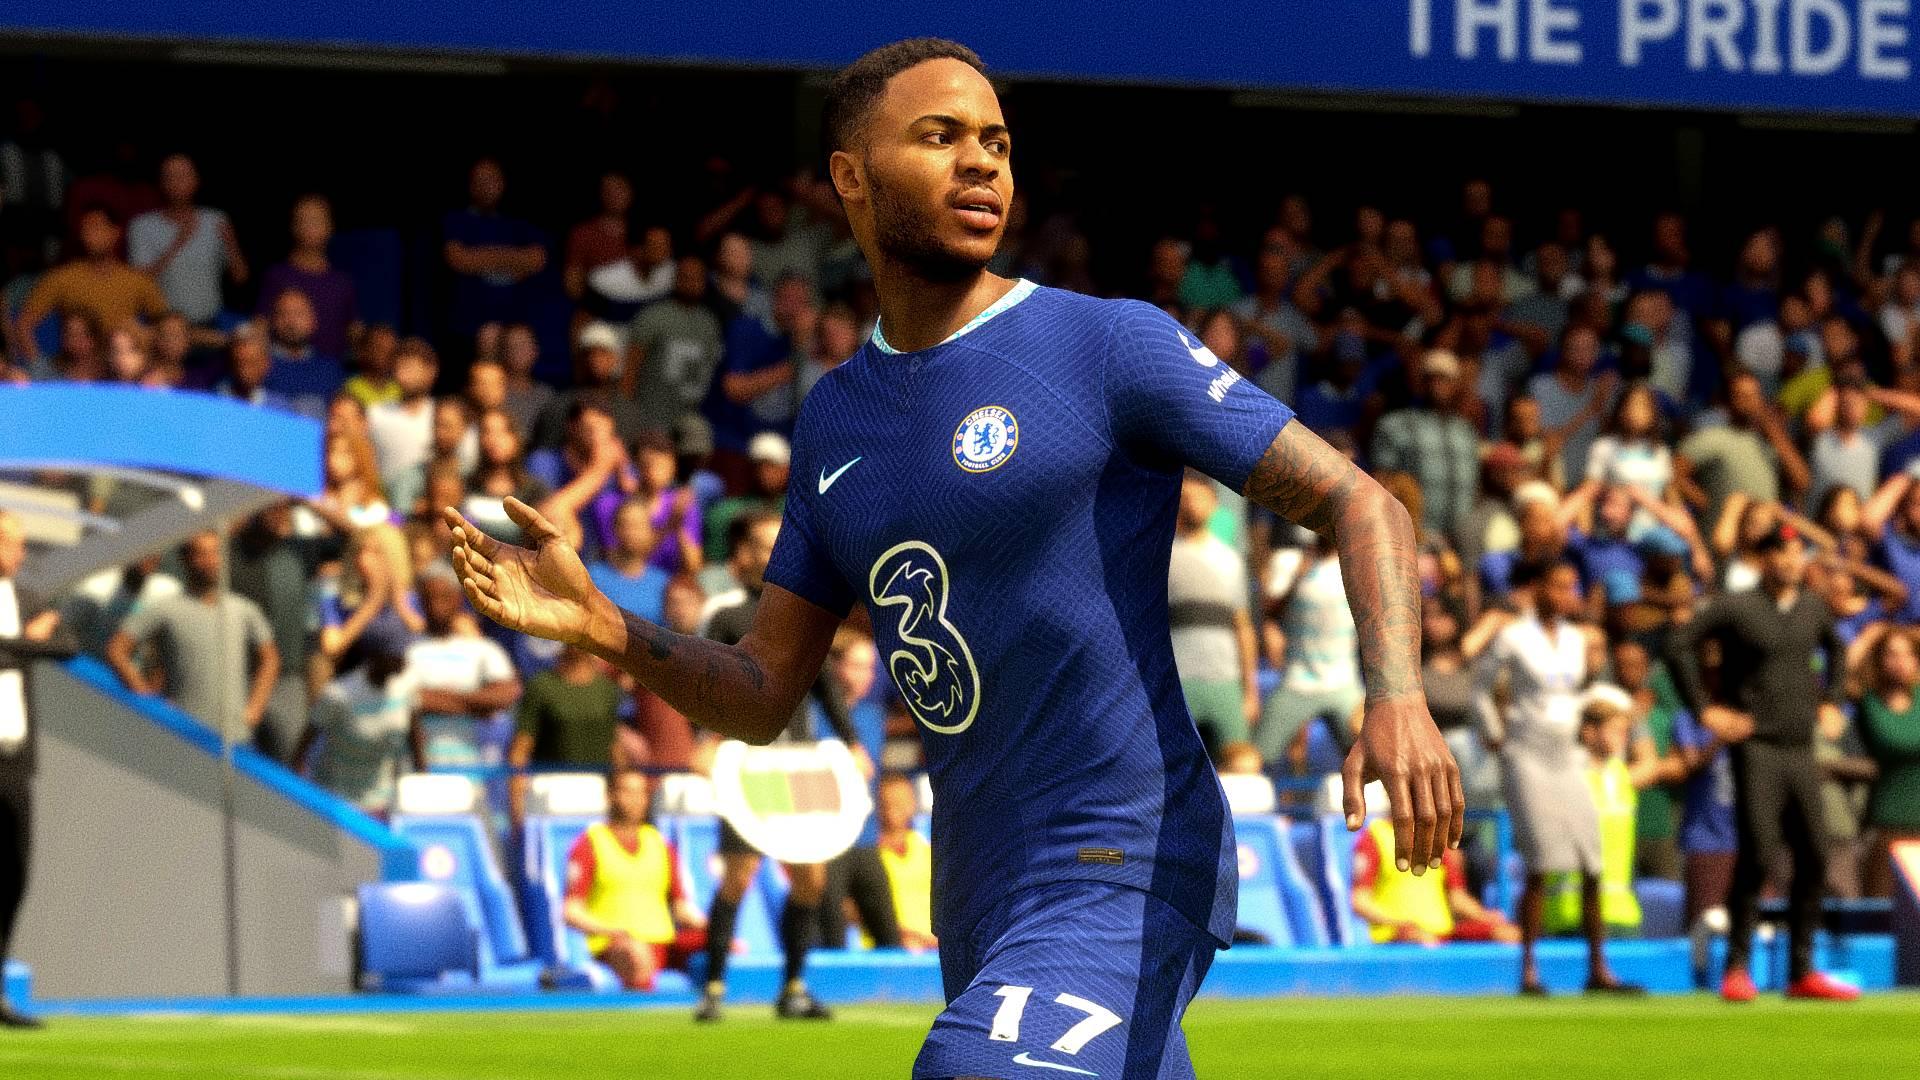 FIFA 23 Best Controller and Camera Settings 